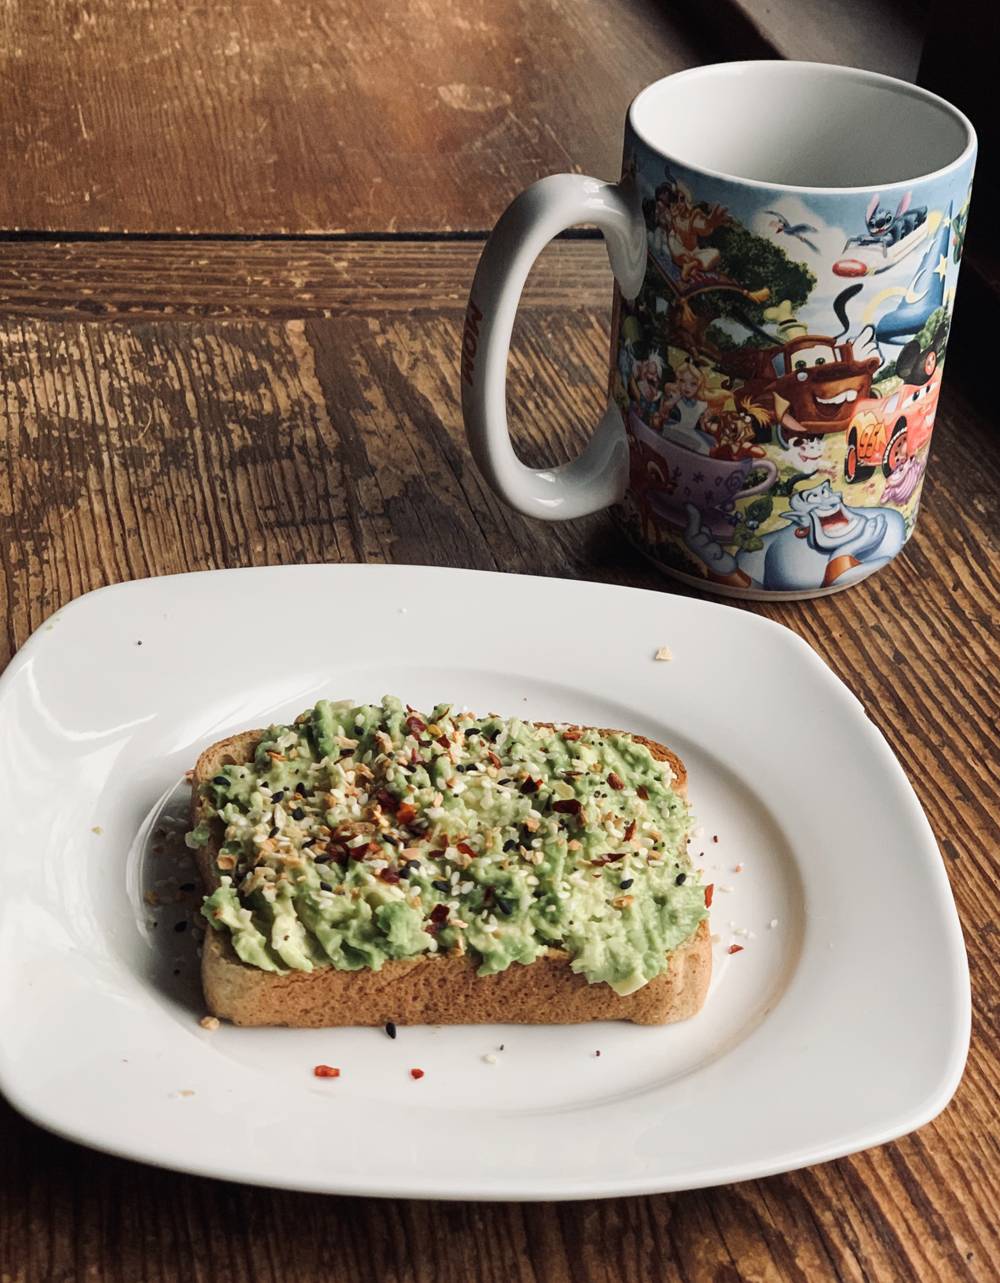 A slice of toast on a white plate. The toast is dressed with smashed avocado and seasoning. There is a Disney-themed mug behind the plate. Everything sits on a wood table. Photo by Stephanie Stuart.